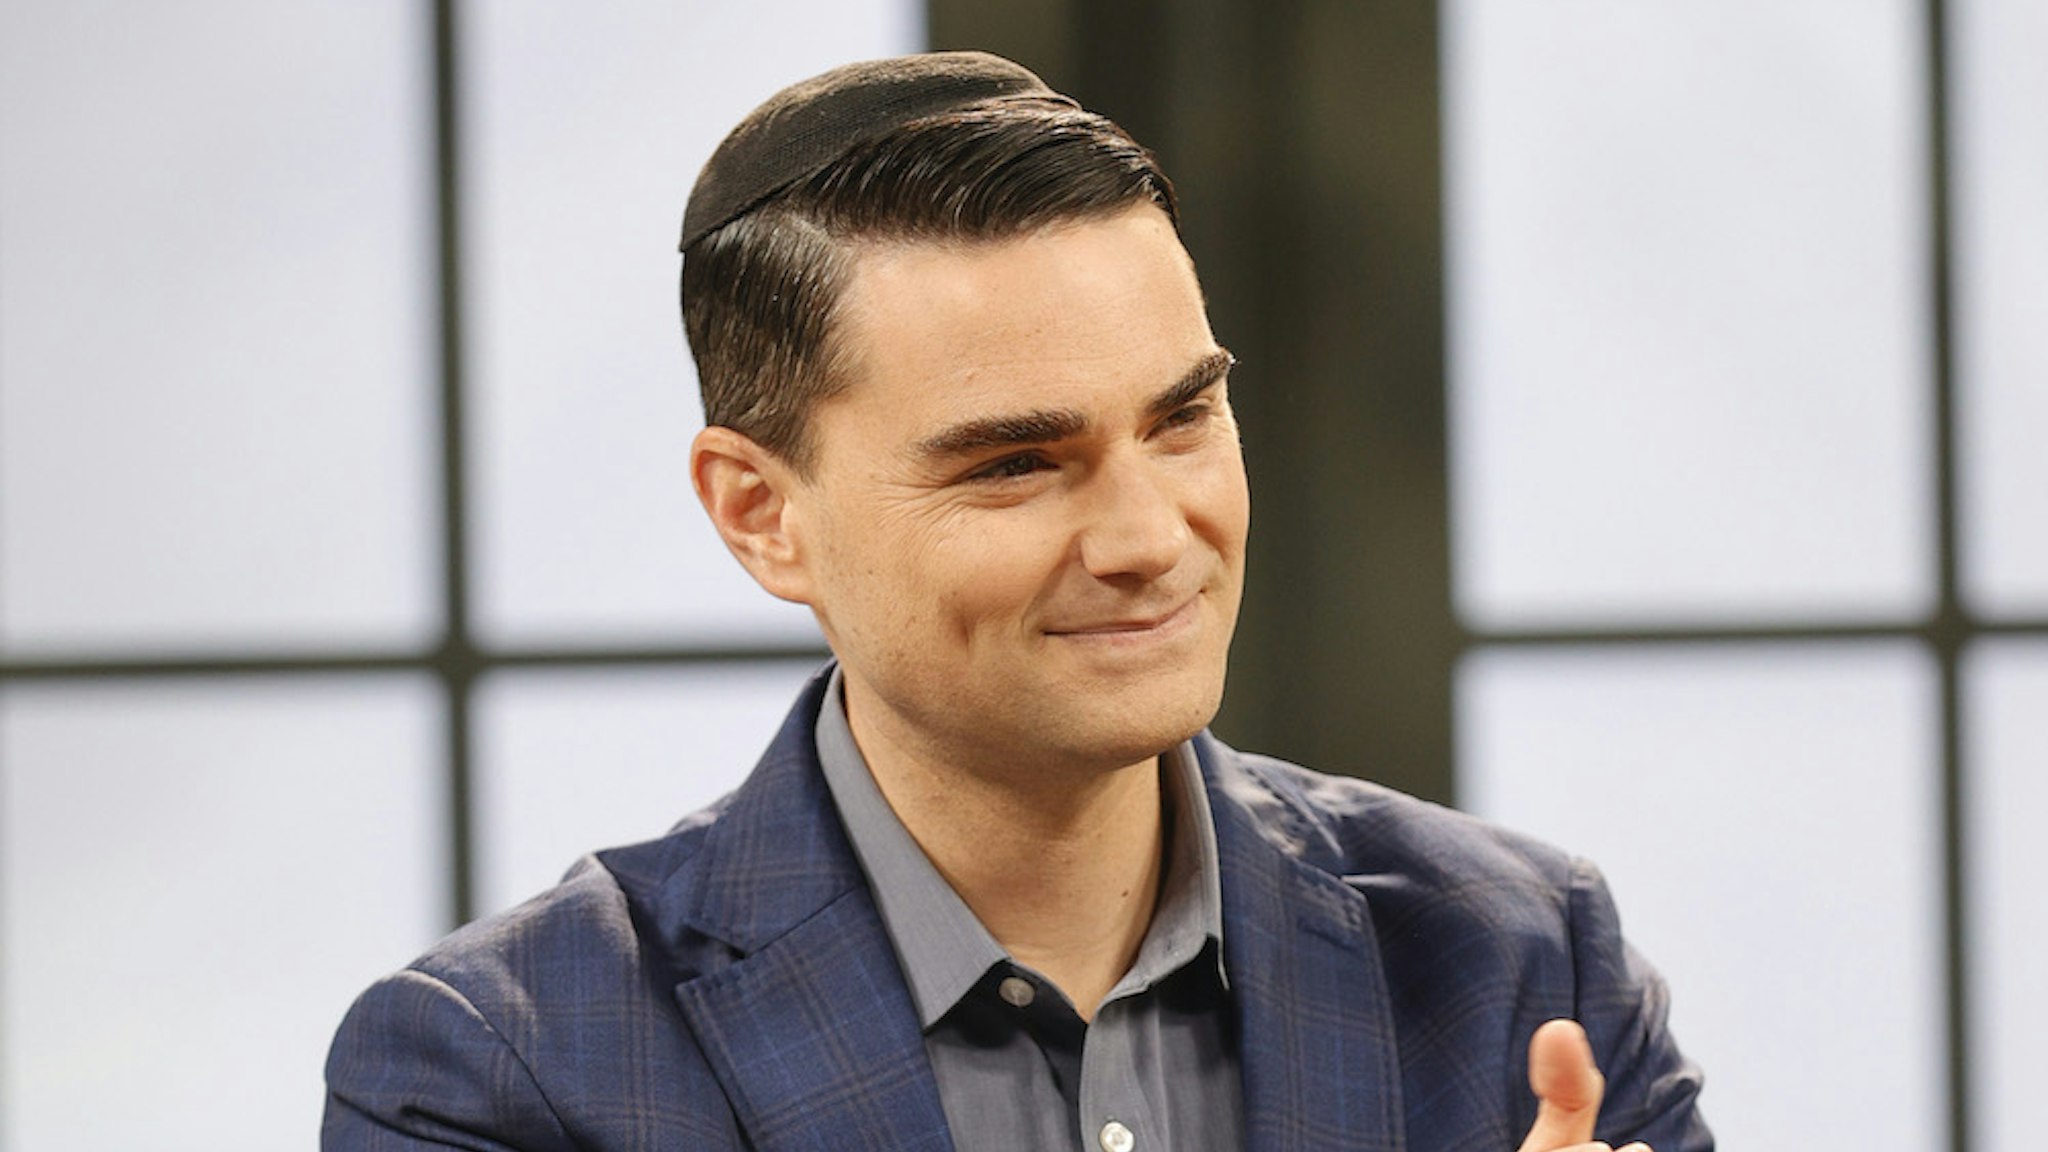 NASHVILLE, TENNESSEE - MARCH 17: American commentator Ben Shapiro is seen on set during a taping of "Candace" on March 17, 2021 in Nashville, Tennessee. The show will air on Friday, March 19, 2021. (Photo by Jason Kempin/Getty Images)